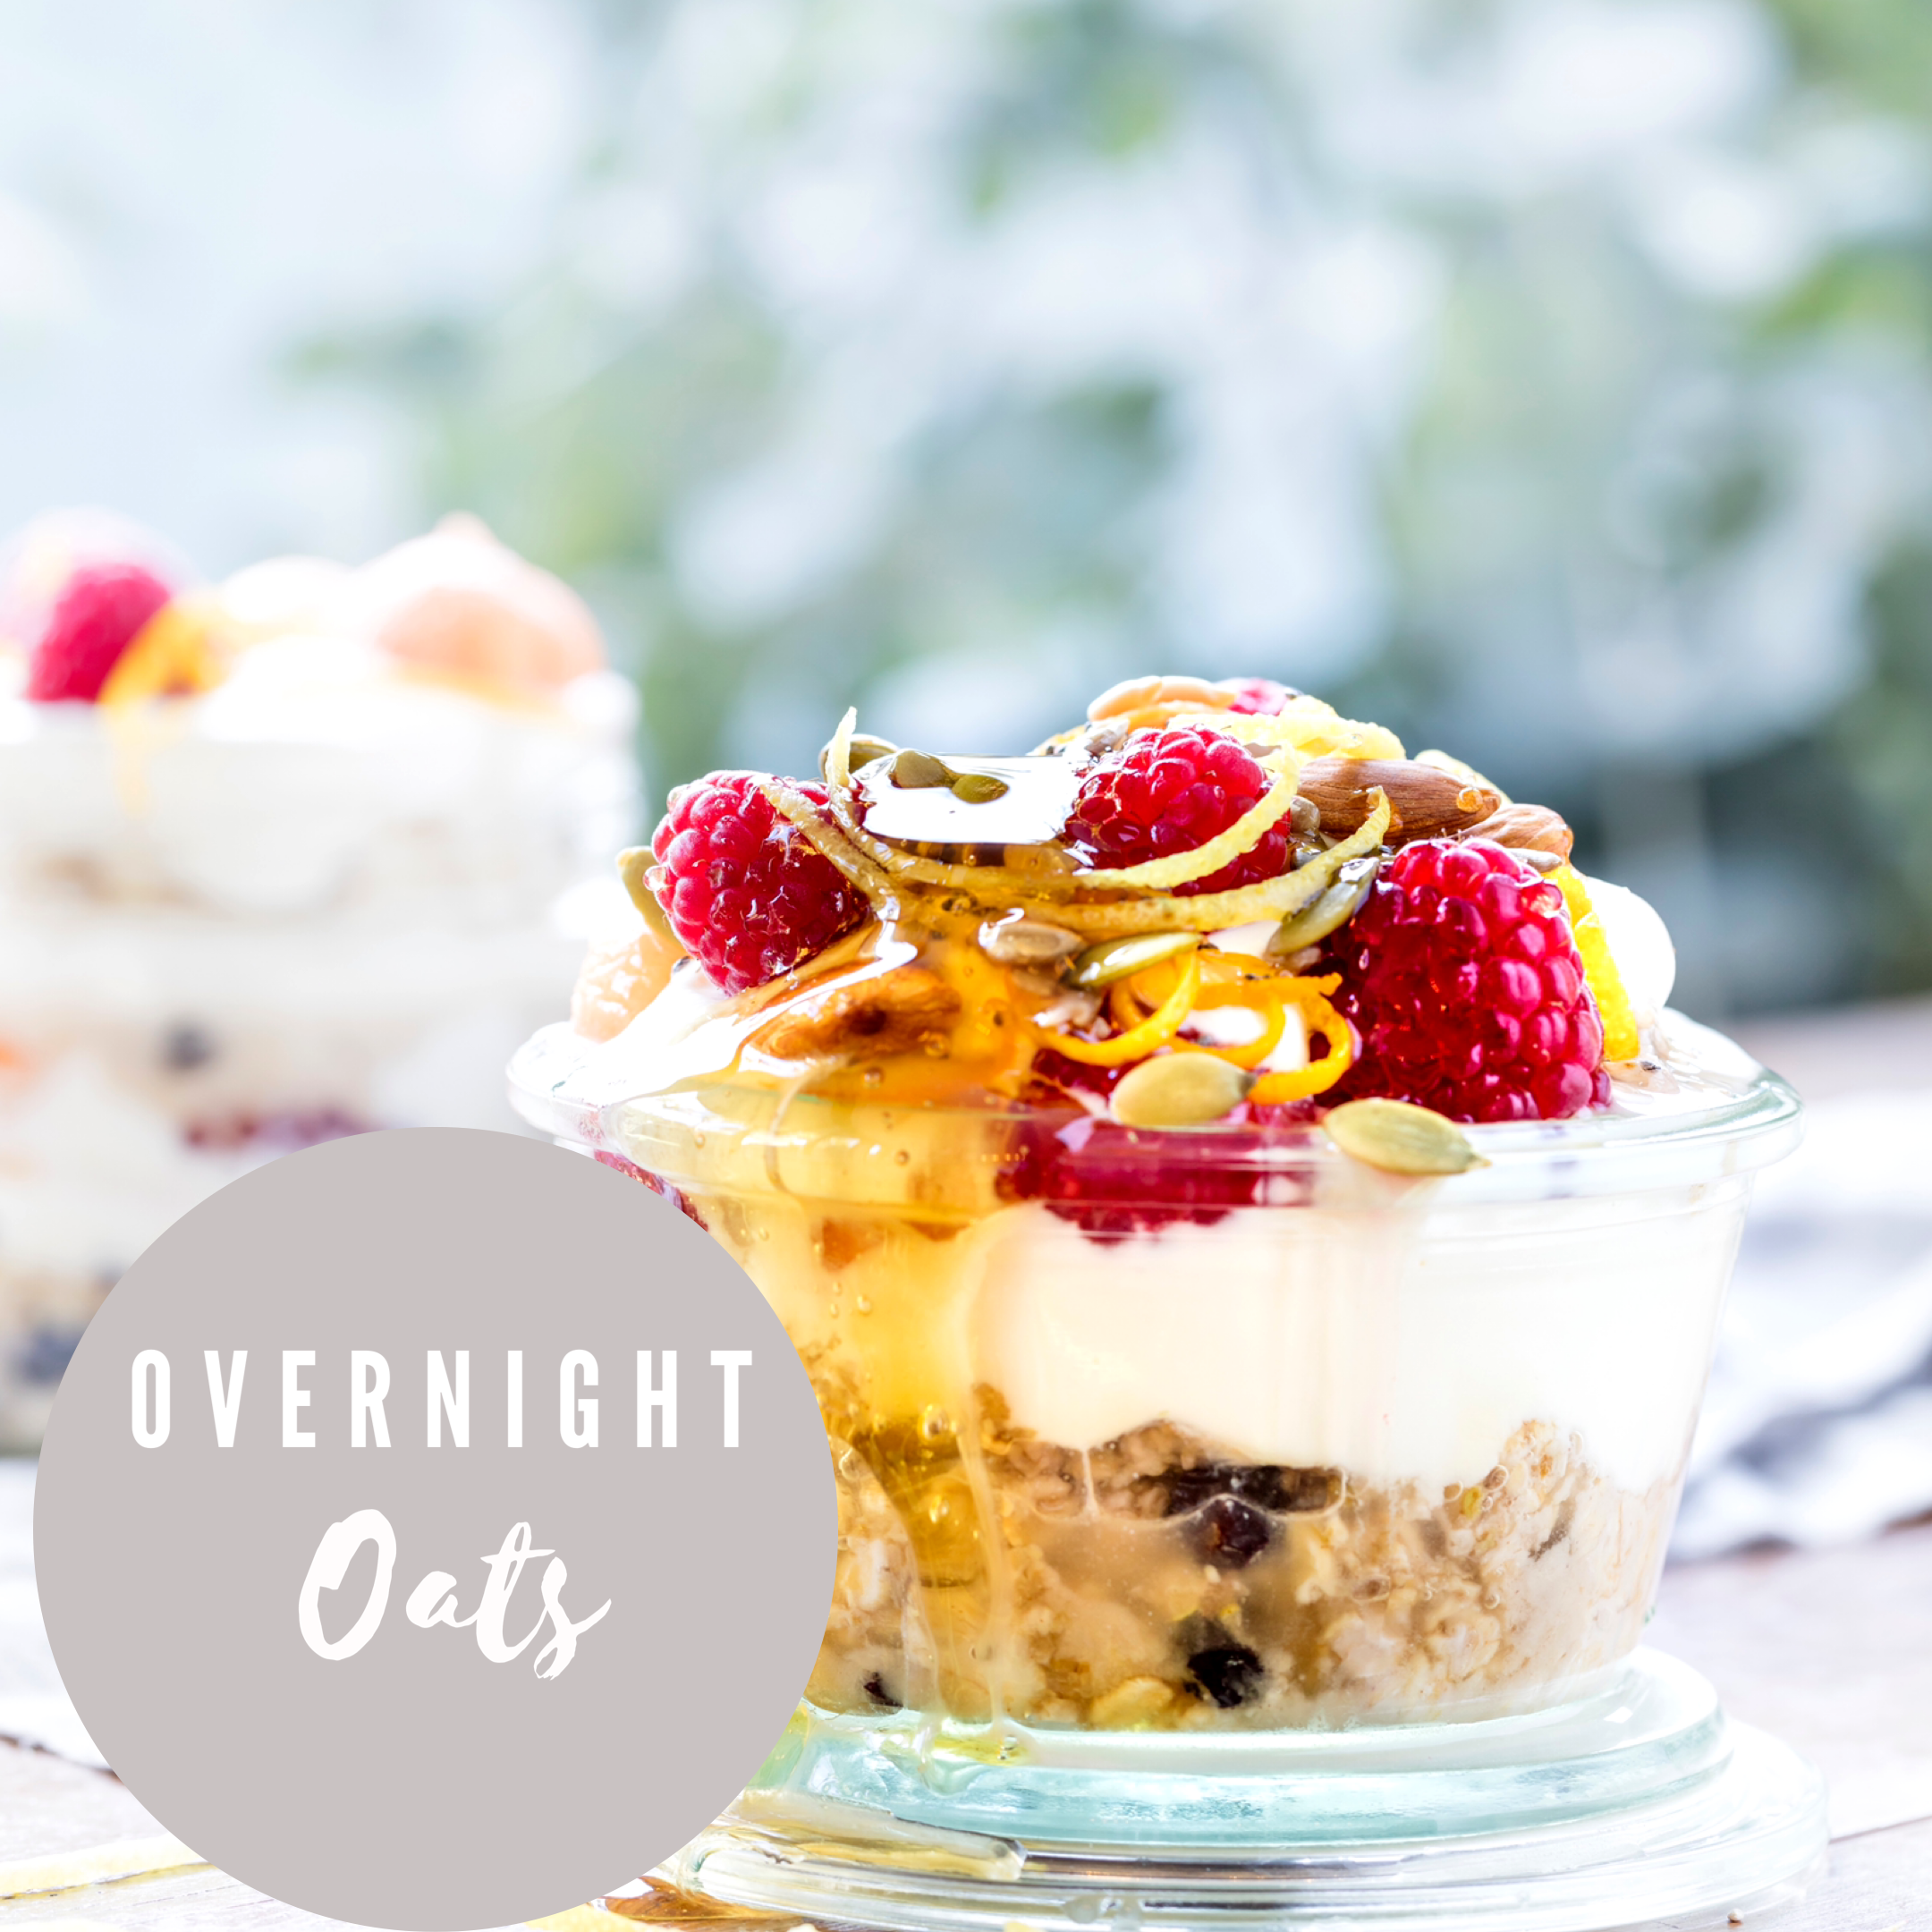 Overnight Oats – the perfect spring / summer breakfast!